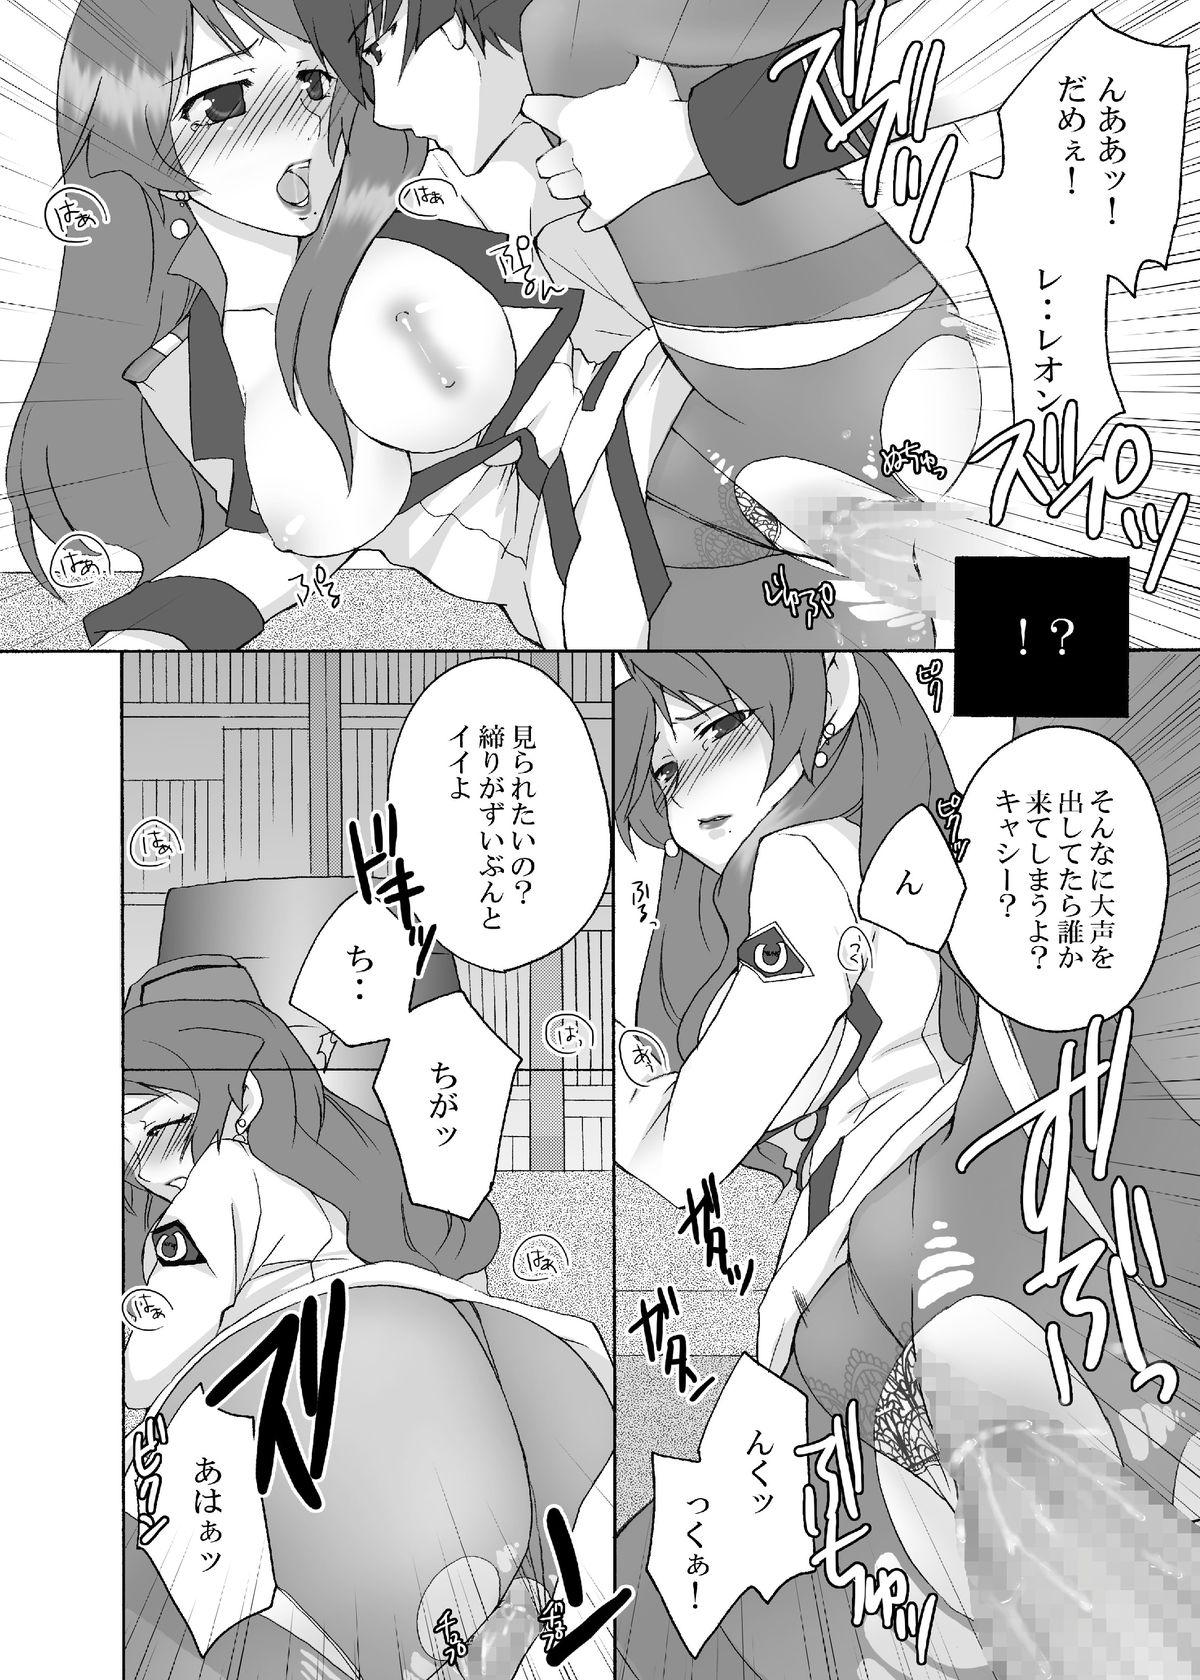 4some Grace Frontier - Macross frontier Lezdom - Page 6